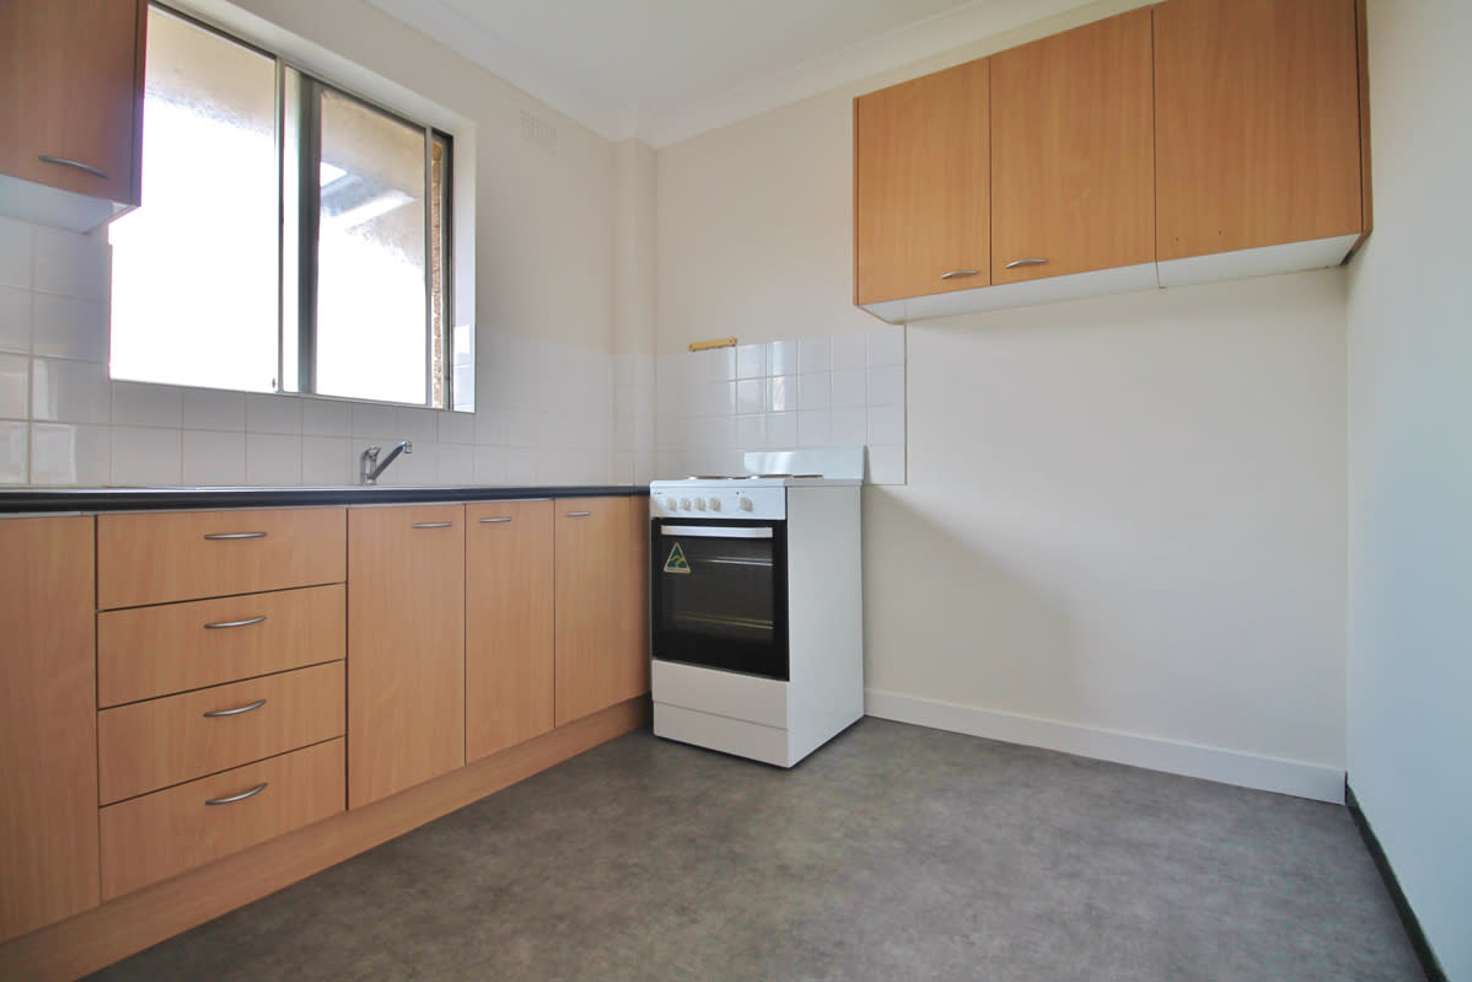 Main view of Homely apartment listing, 8/25 Bexley Rd, Campsie NSW 2194